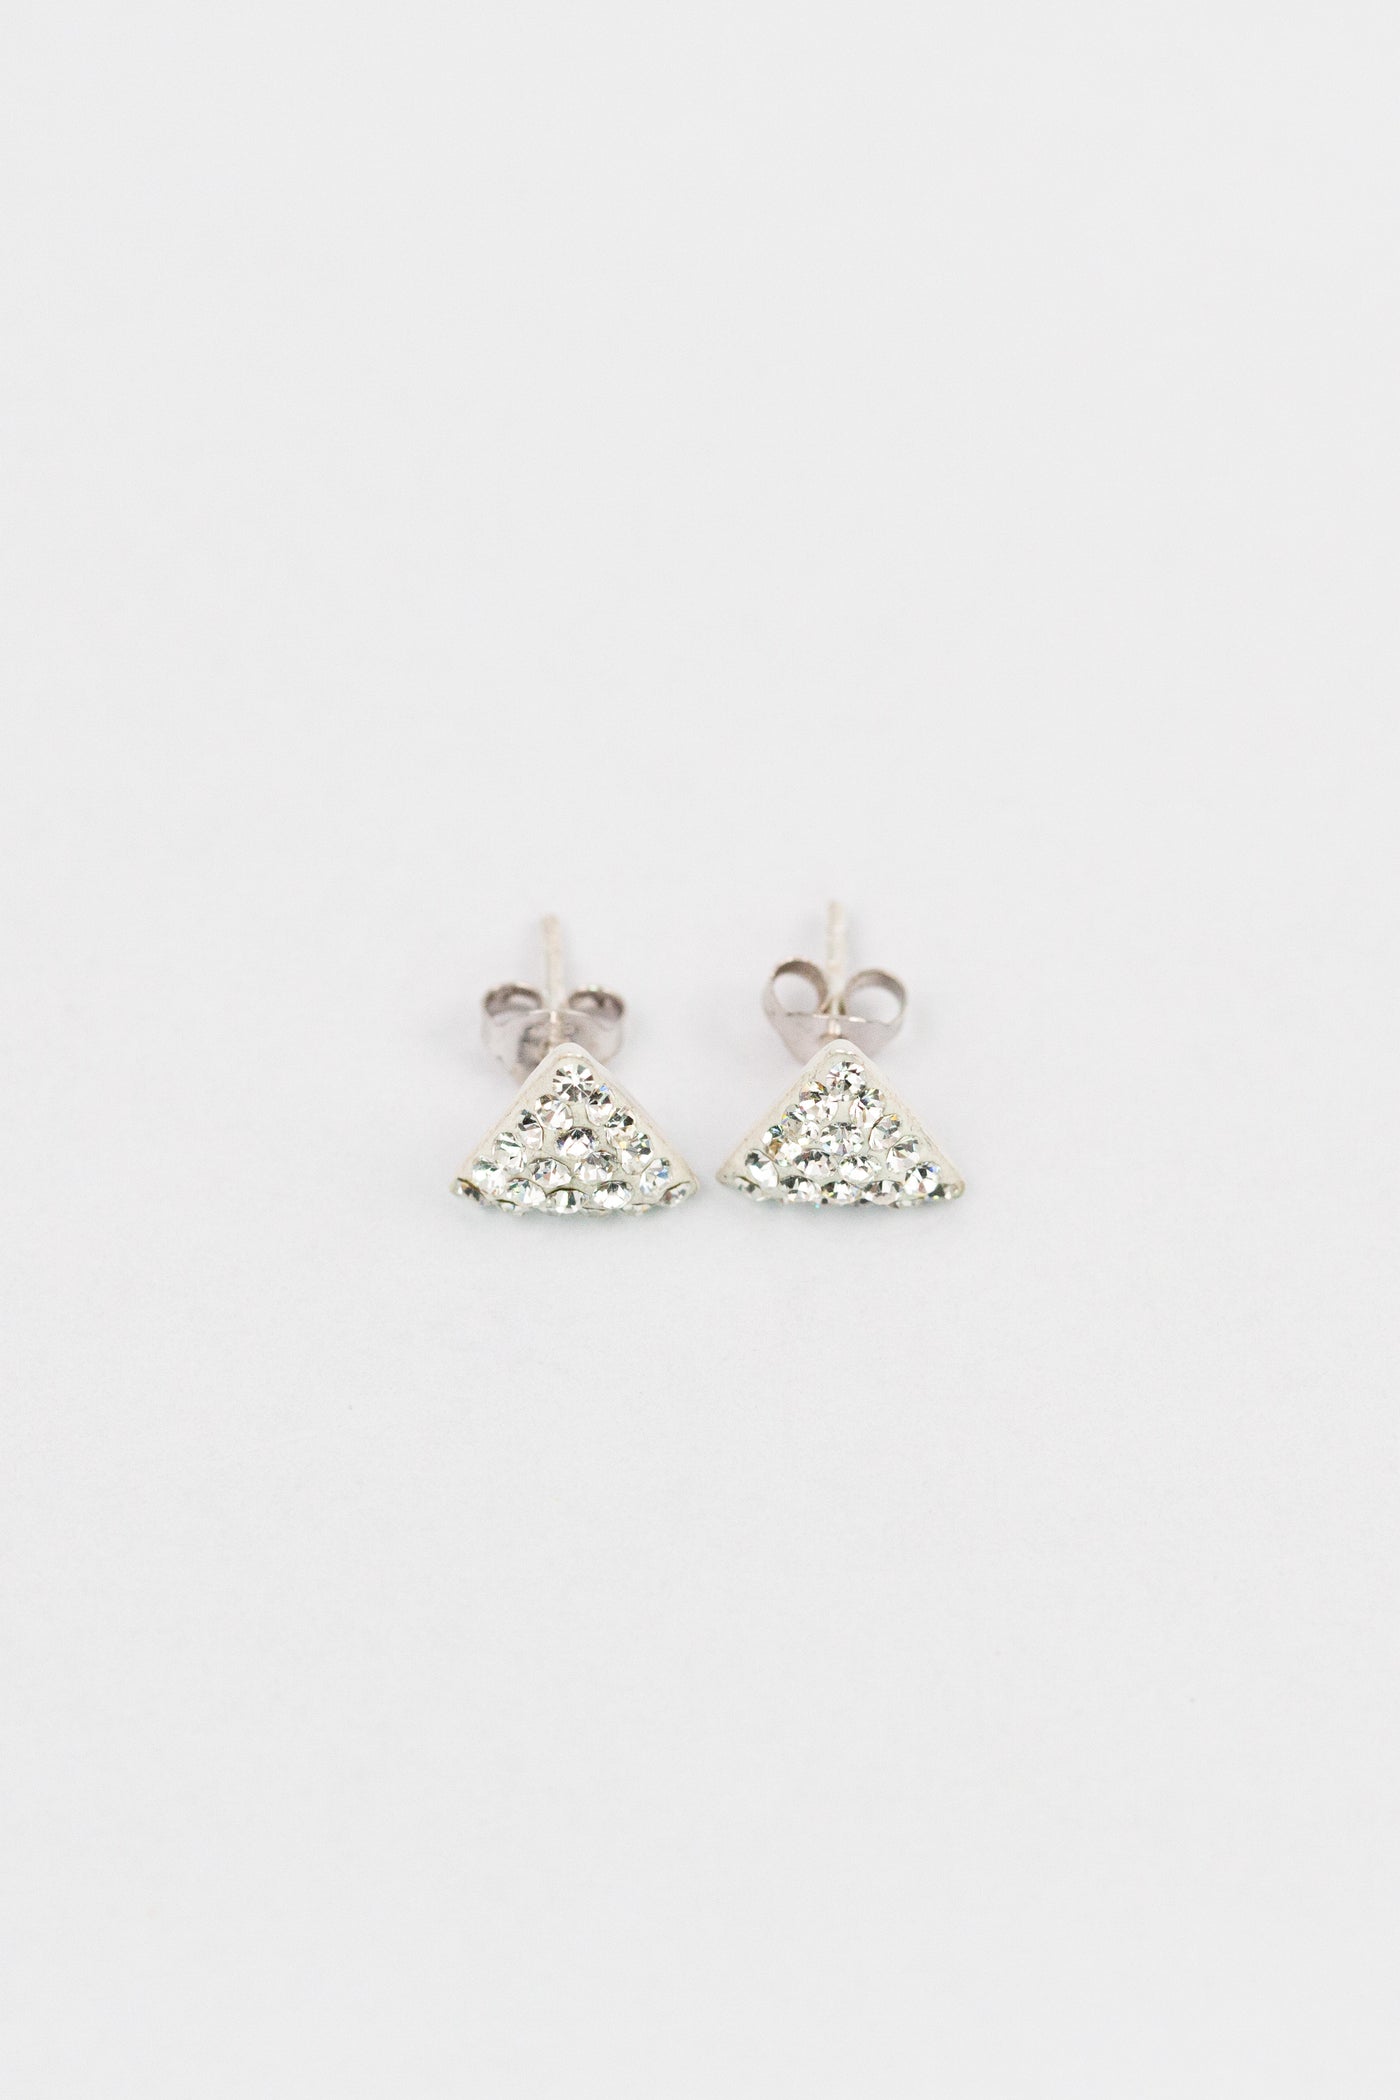 Crystal Triangle Pave Stud Sterling Silver Earrings | Annie and Sisters | sister stud earrings, for kids, children's jewelry, kid's jewelry, best friend